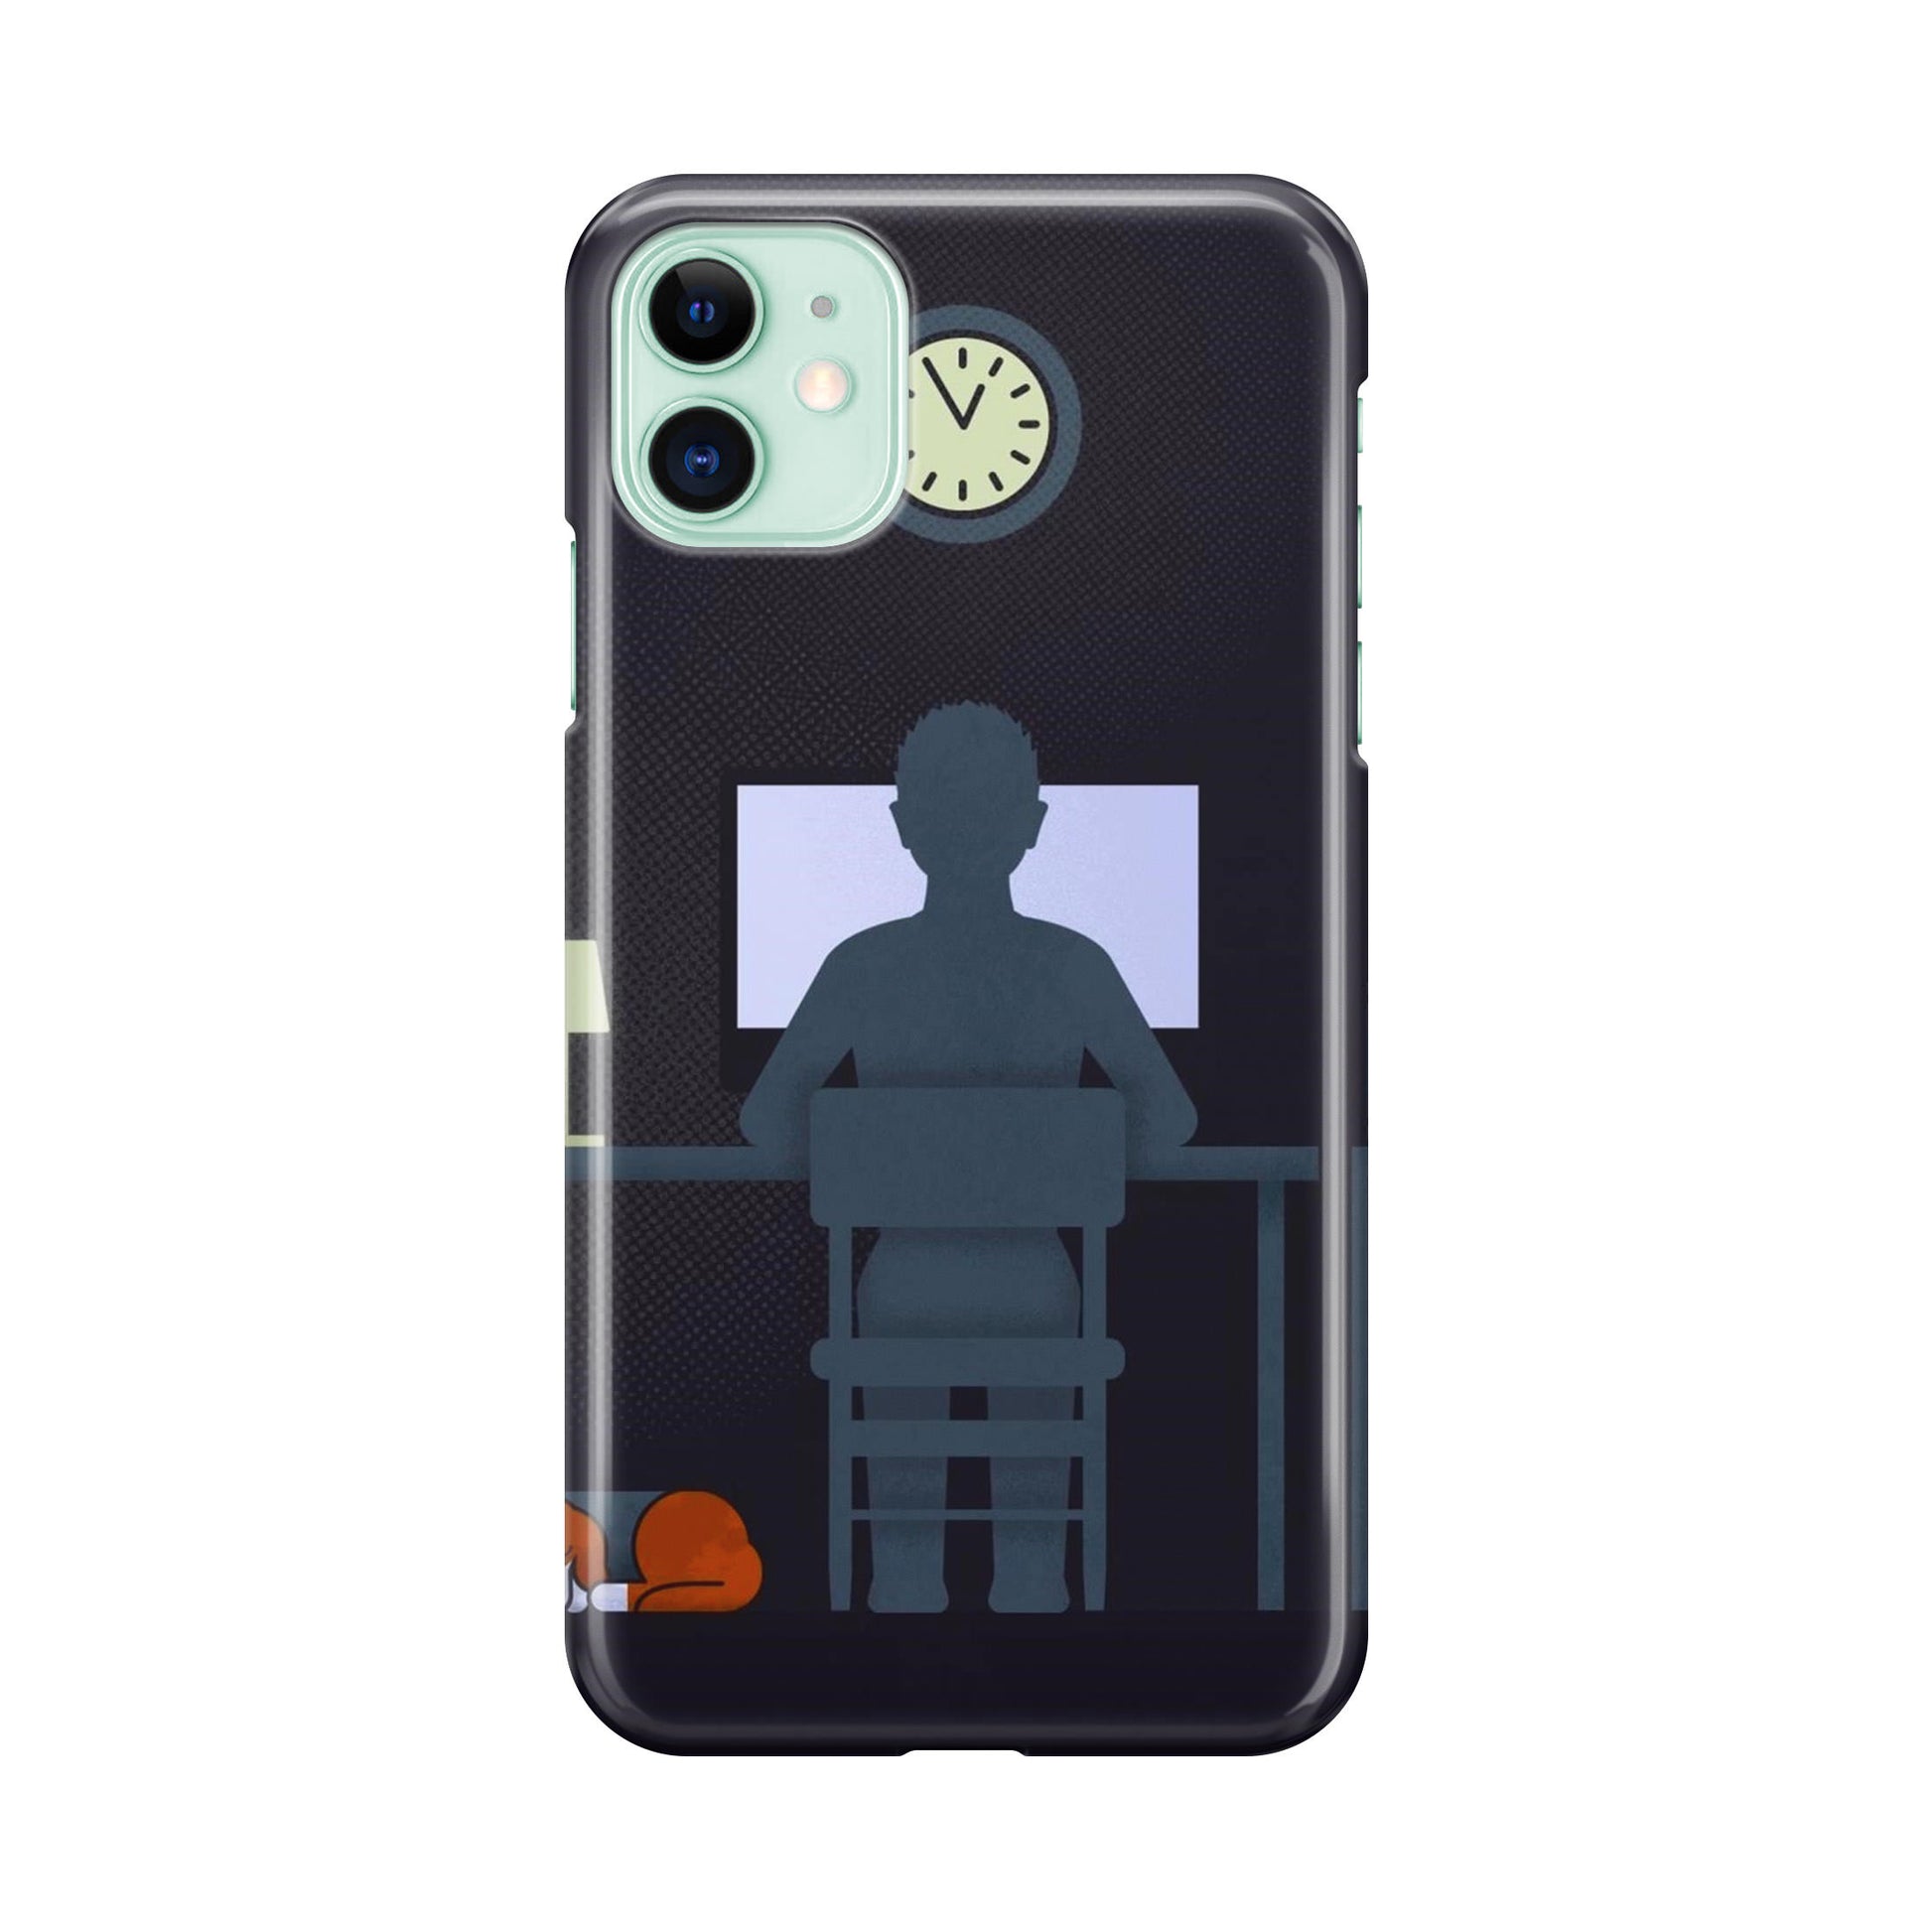 Engineering Student Life iPhone 12 Case